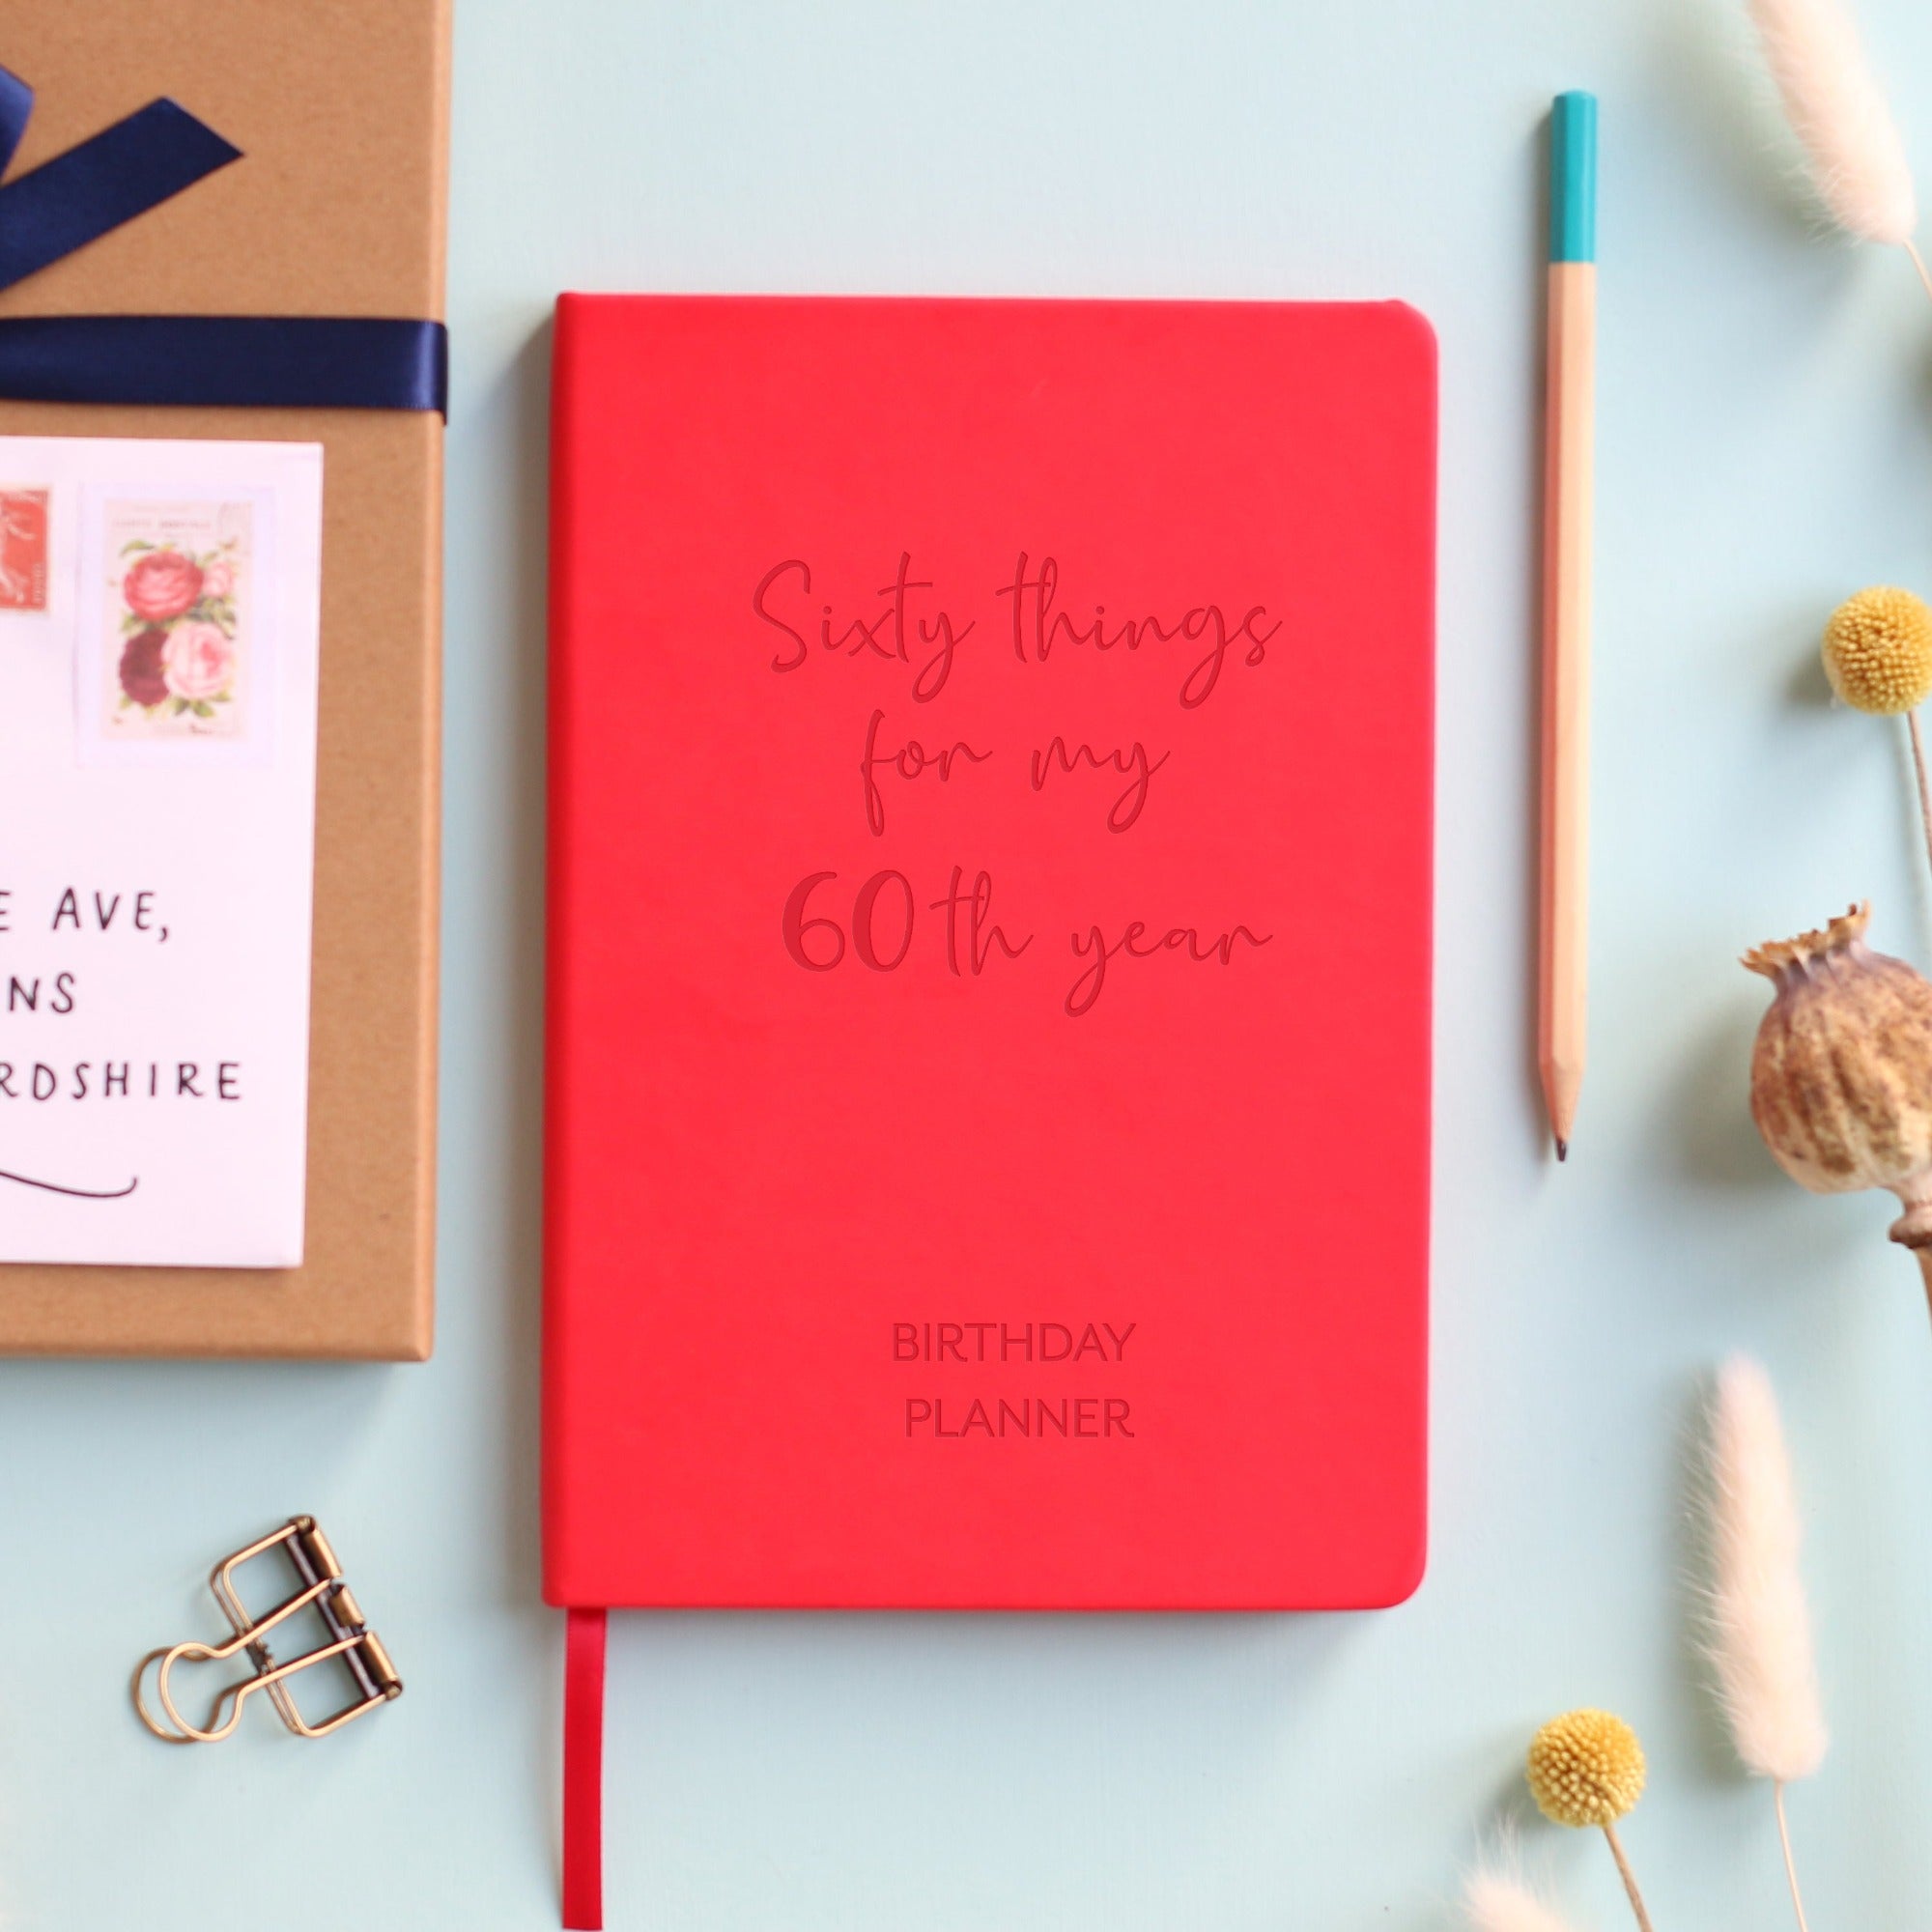 Red Vegan leather notebook with personalised laser engraving on the cover saying sixty things for my 60th year